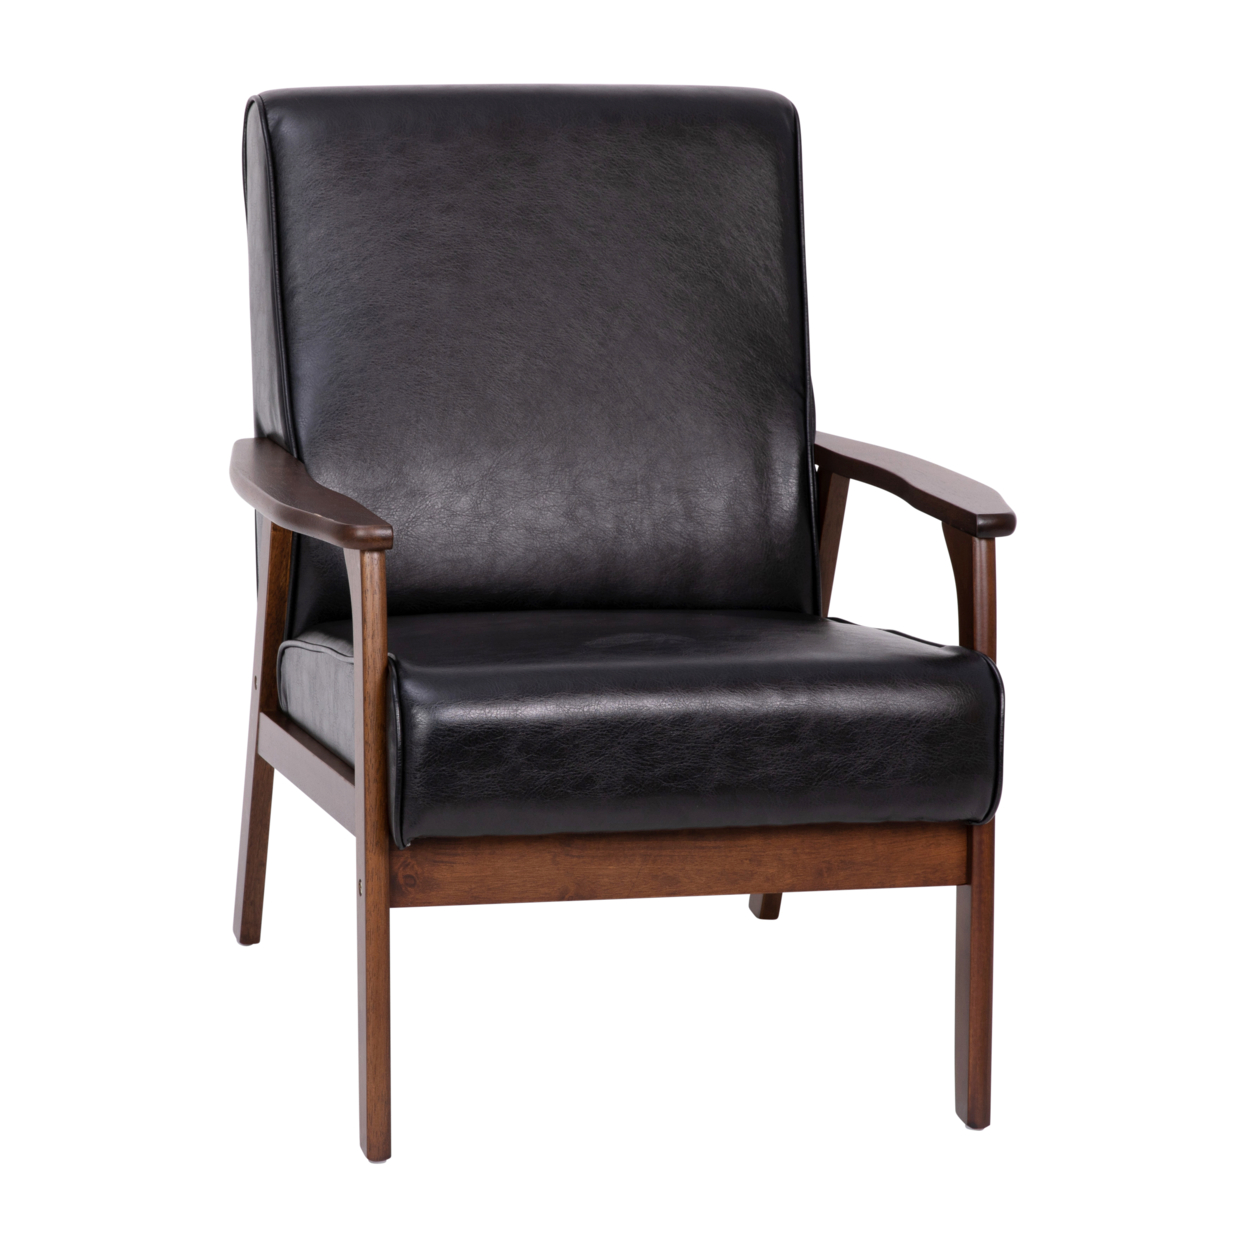 Black LeatherSoft Arm Chair